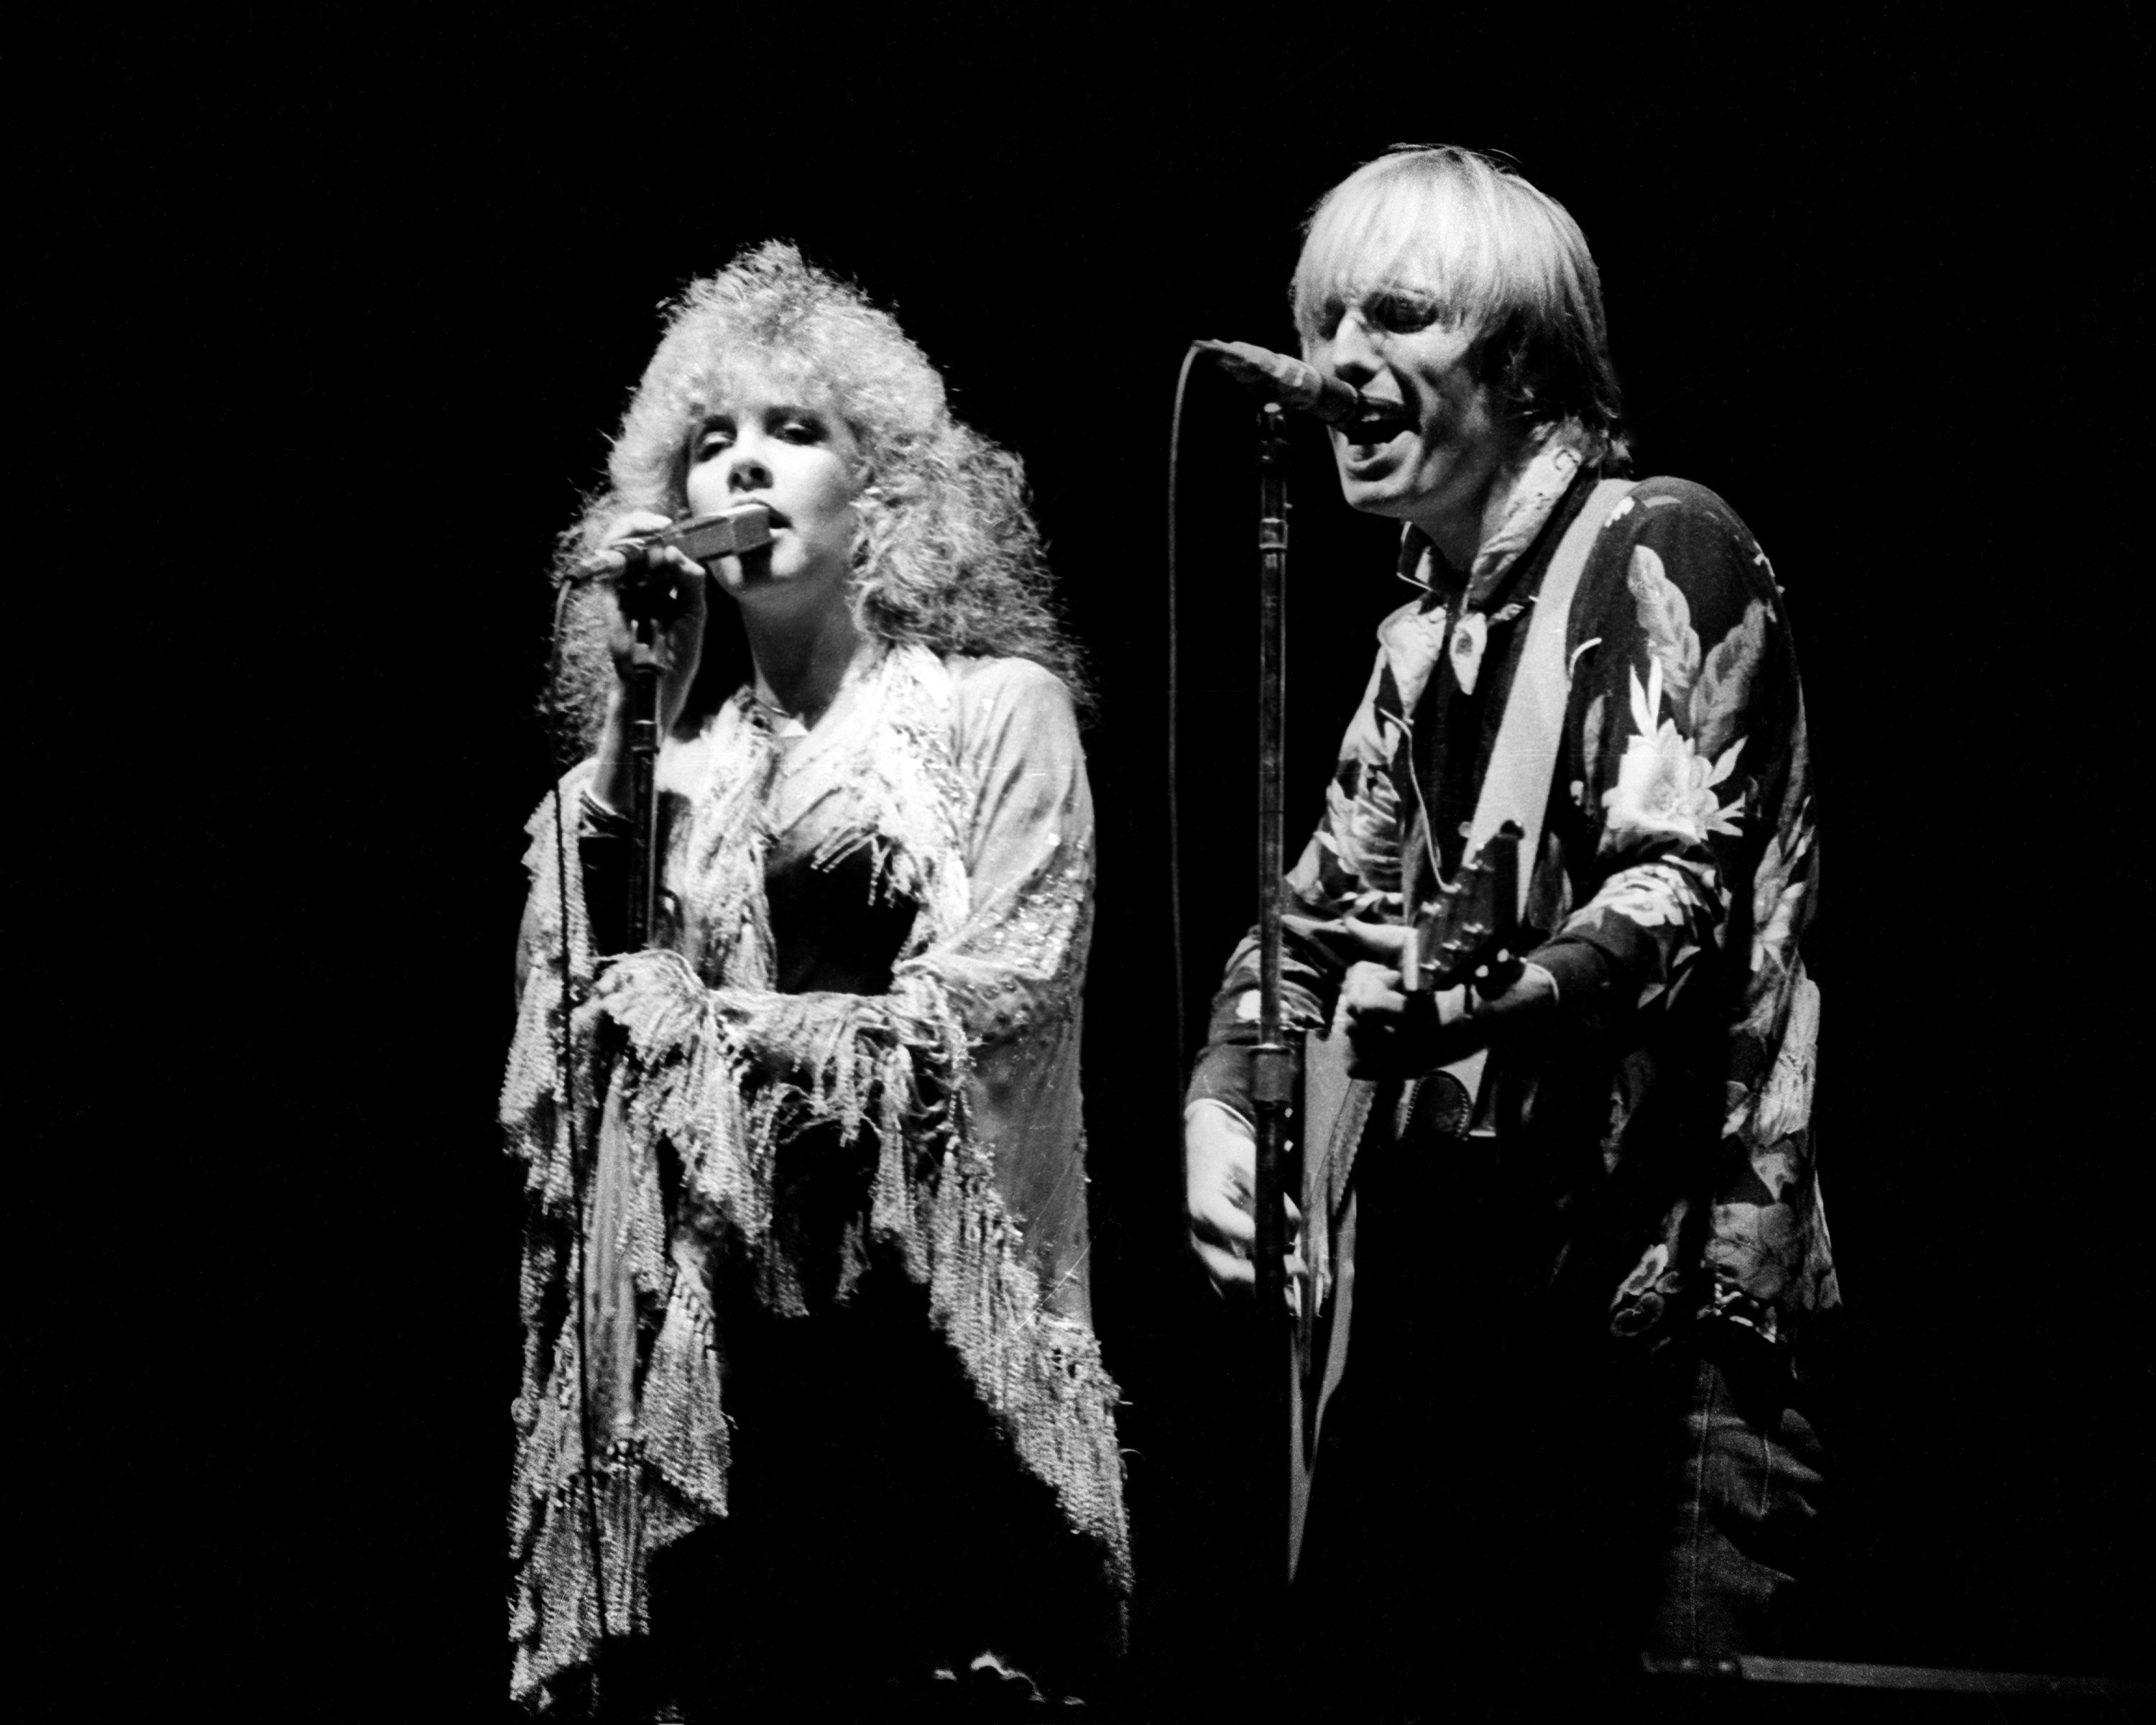 A black and white photo of Stevie Nicks and Tom Petty singing into microphones. Petty plays the guitar.